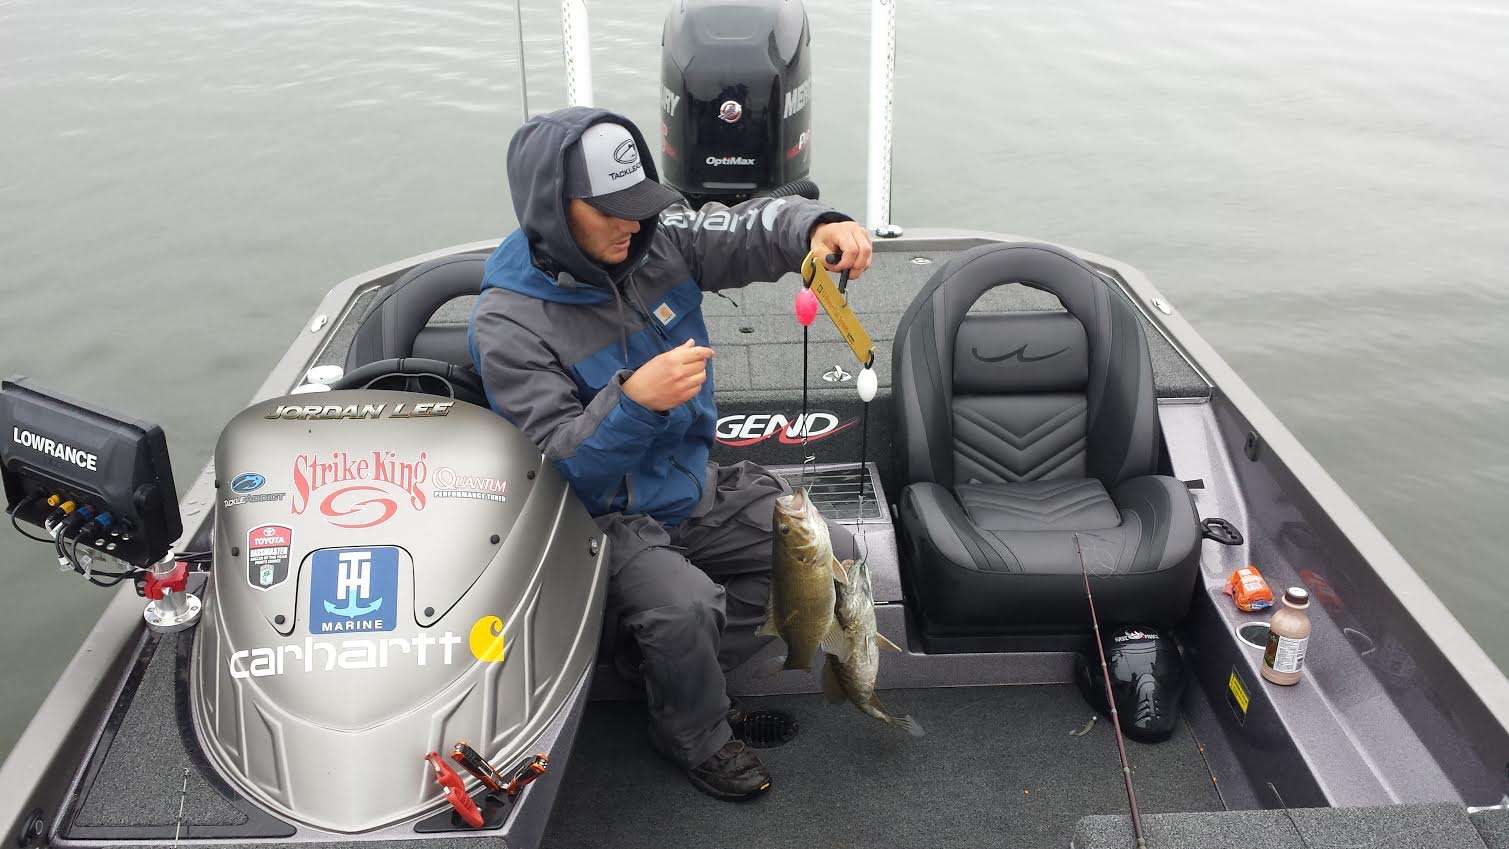 Jordan Lee is culling up a few ounces; he has caught other keepers that didn't help his total.

